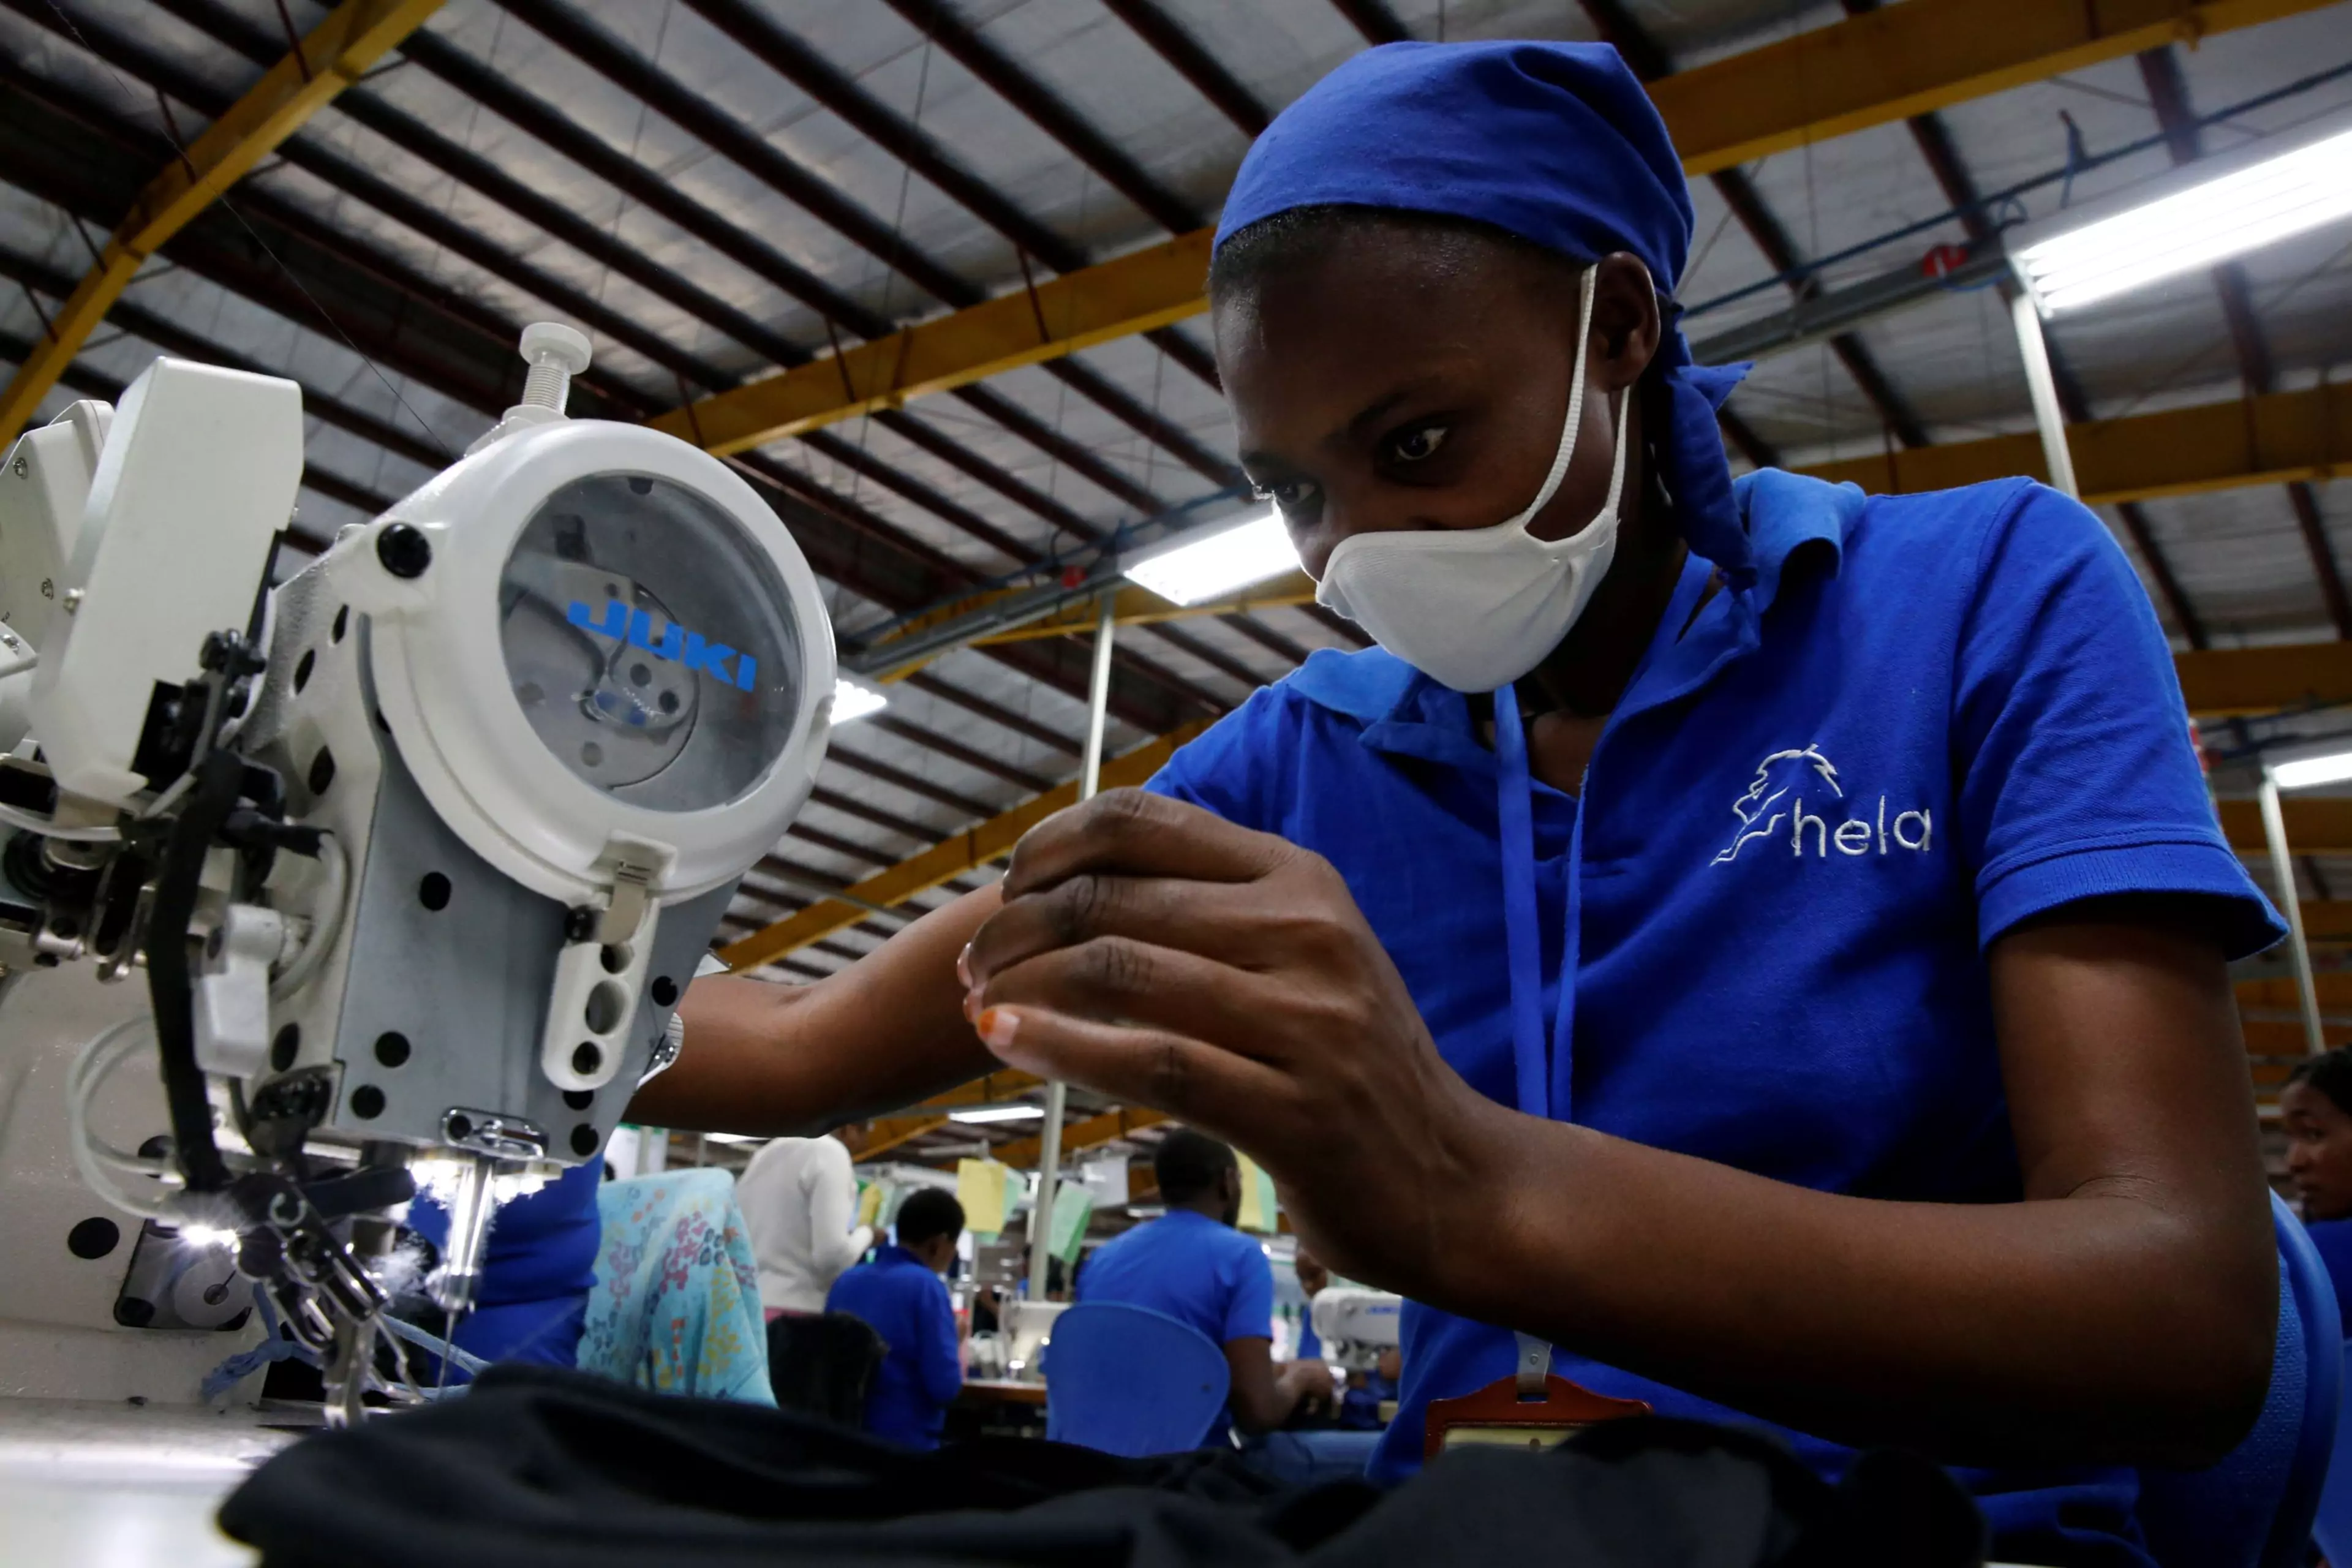 A worker sews at an export processing zone factory in Athi River, Kenya.